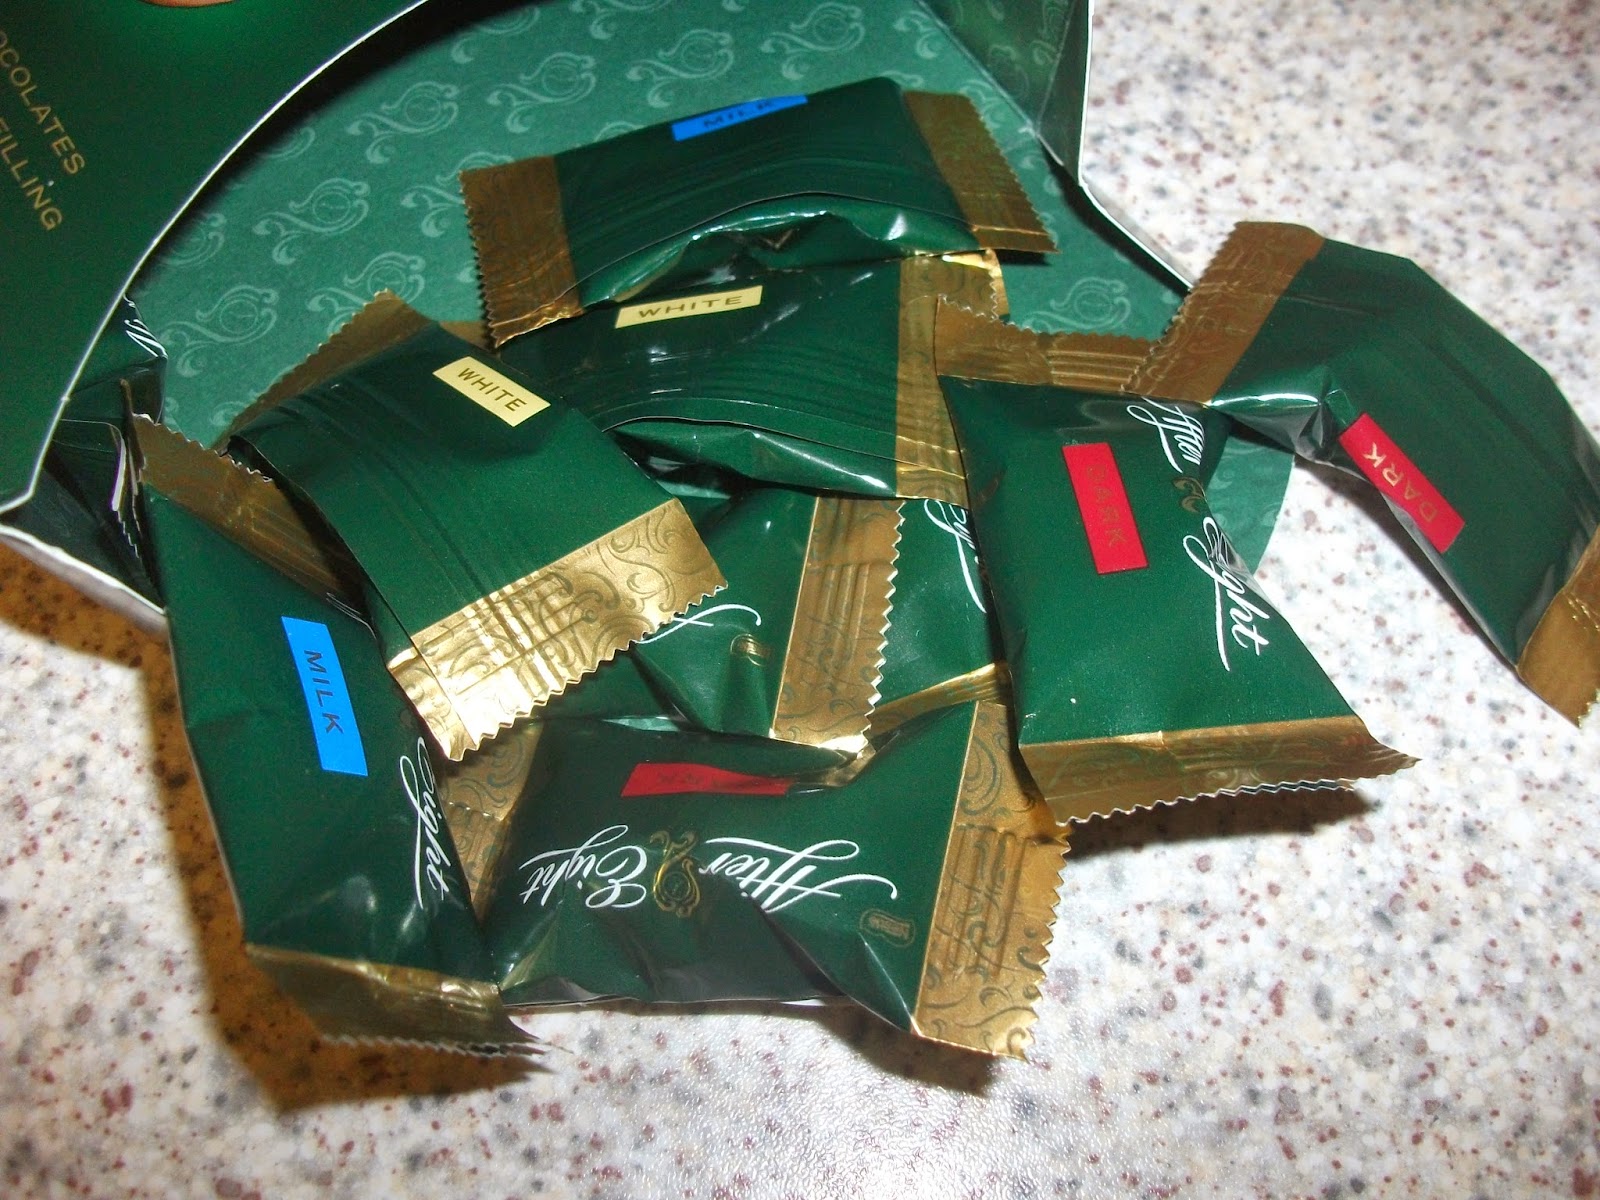 After Eight Finest Mint Selection Box Review